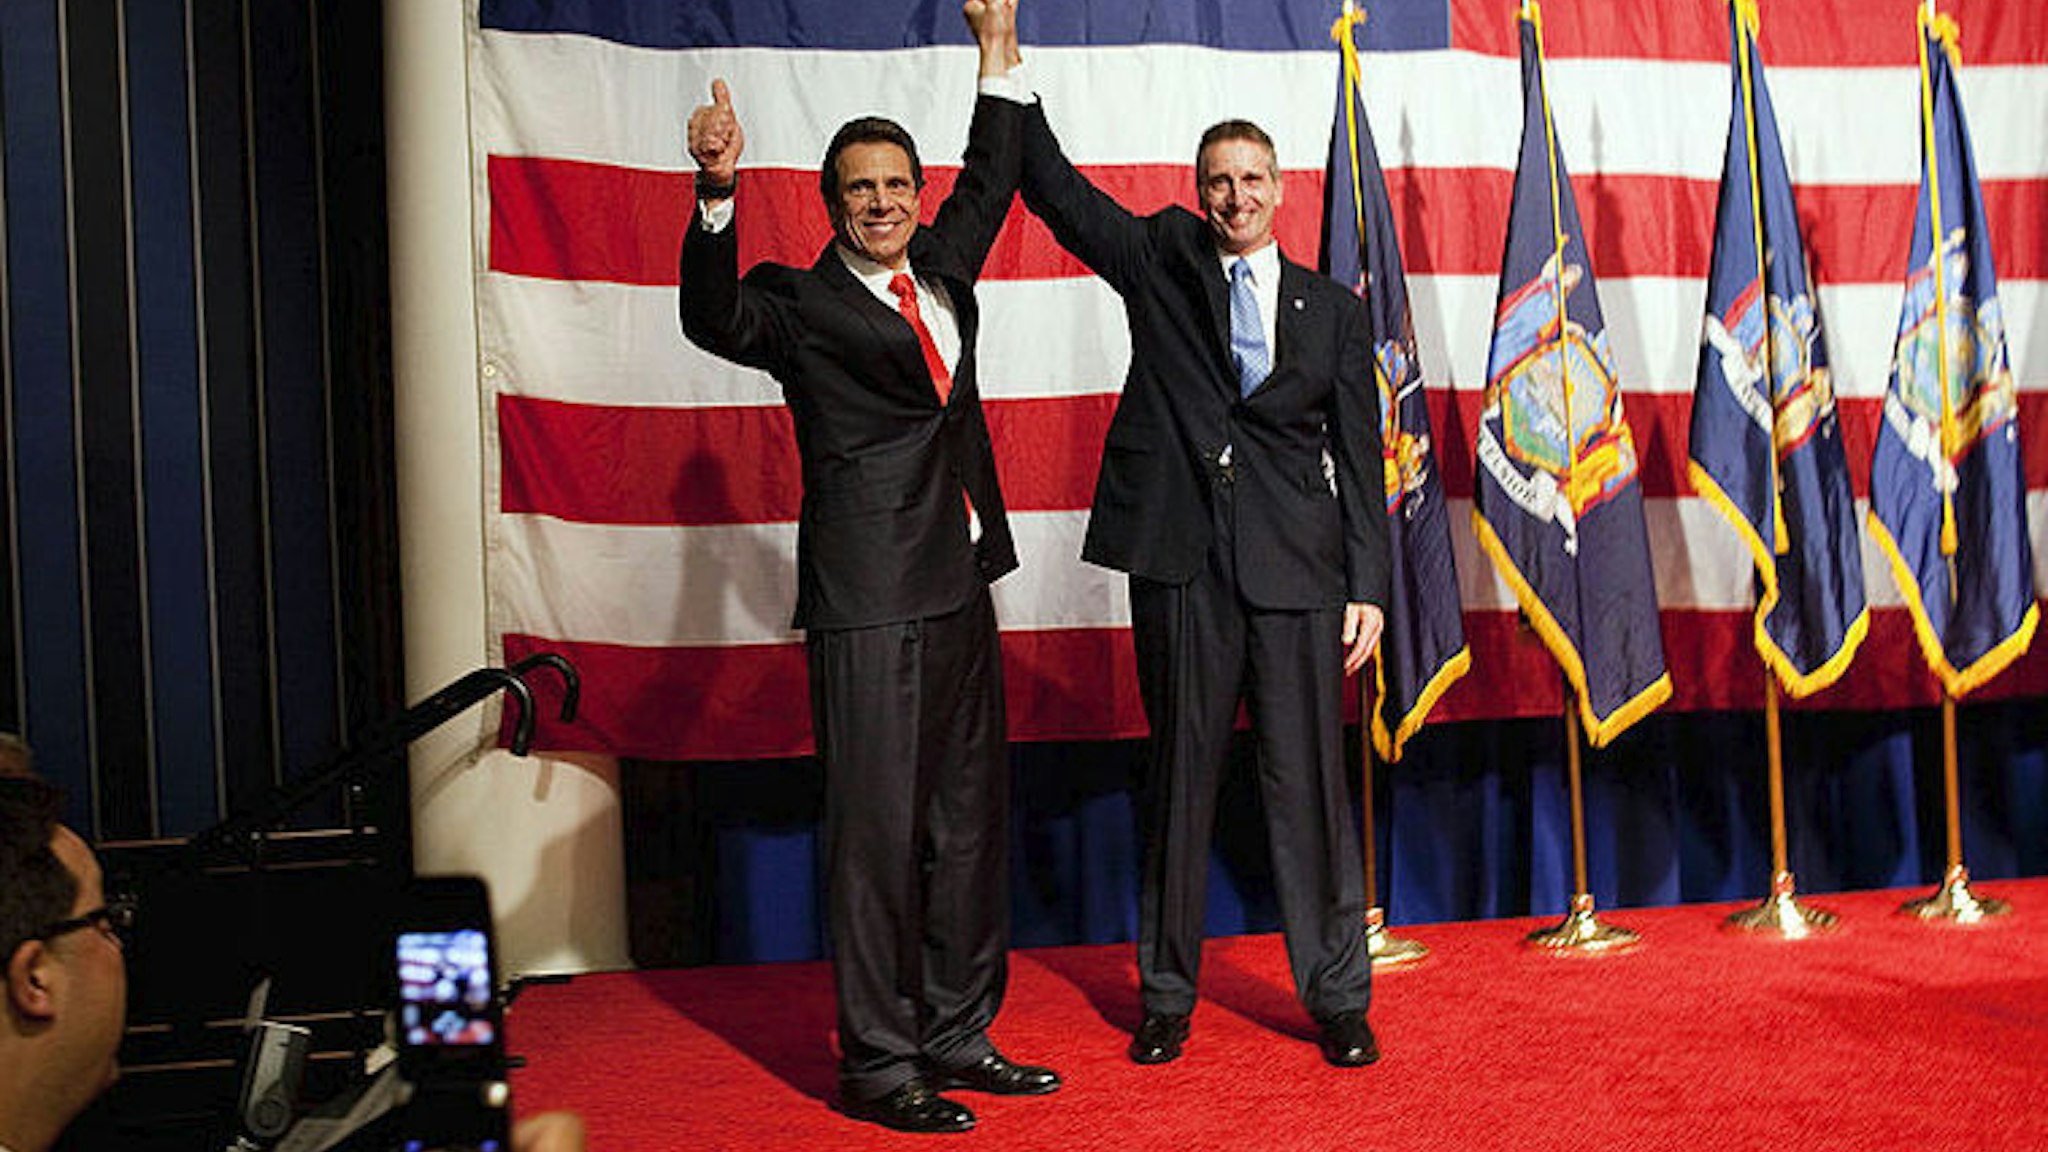 New York Governor-elect Andrew Cuomo (L) and Lieutenant Governor-elect Robert Duffy celebrate at the Sheraton New York on election night, November 2, 2010 in New York City.